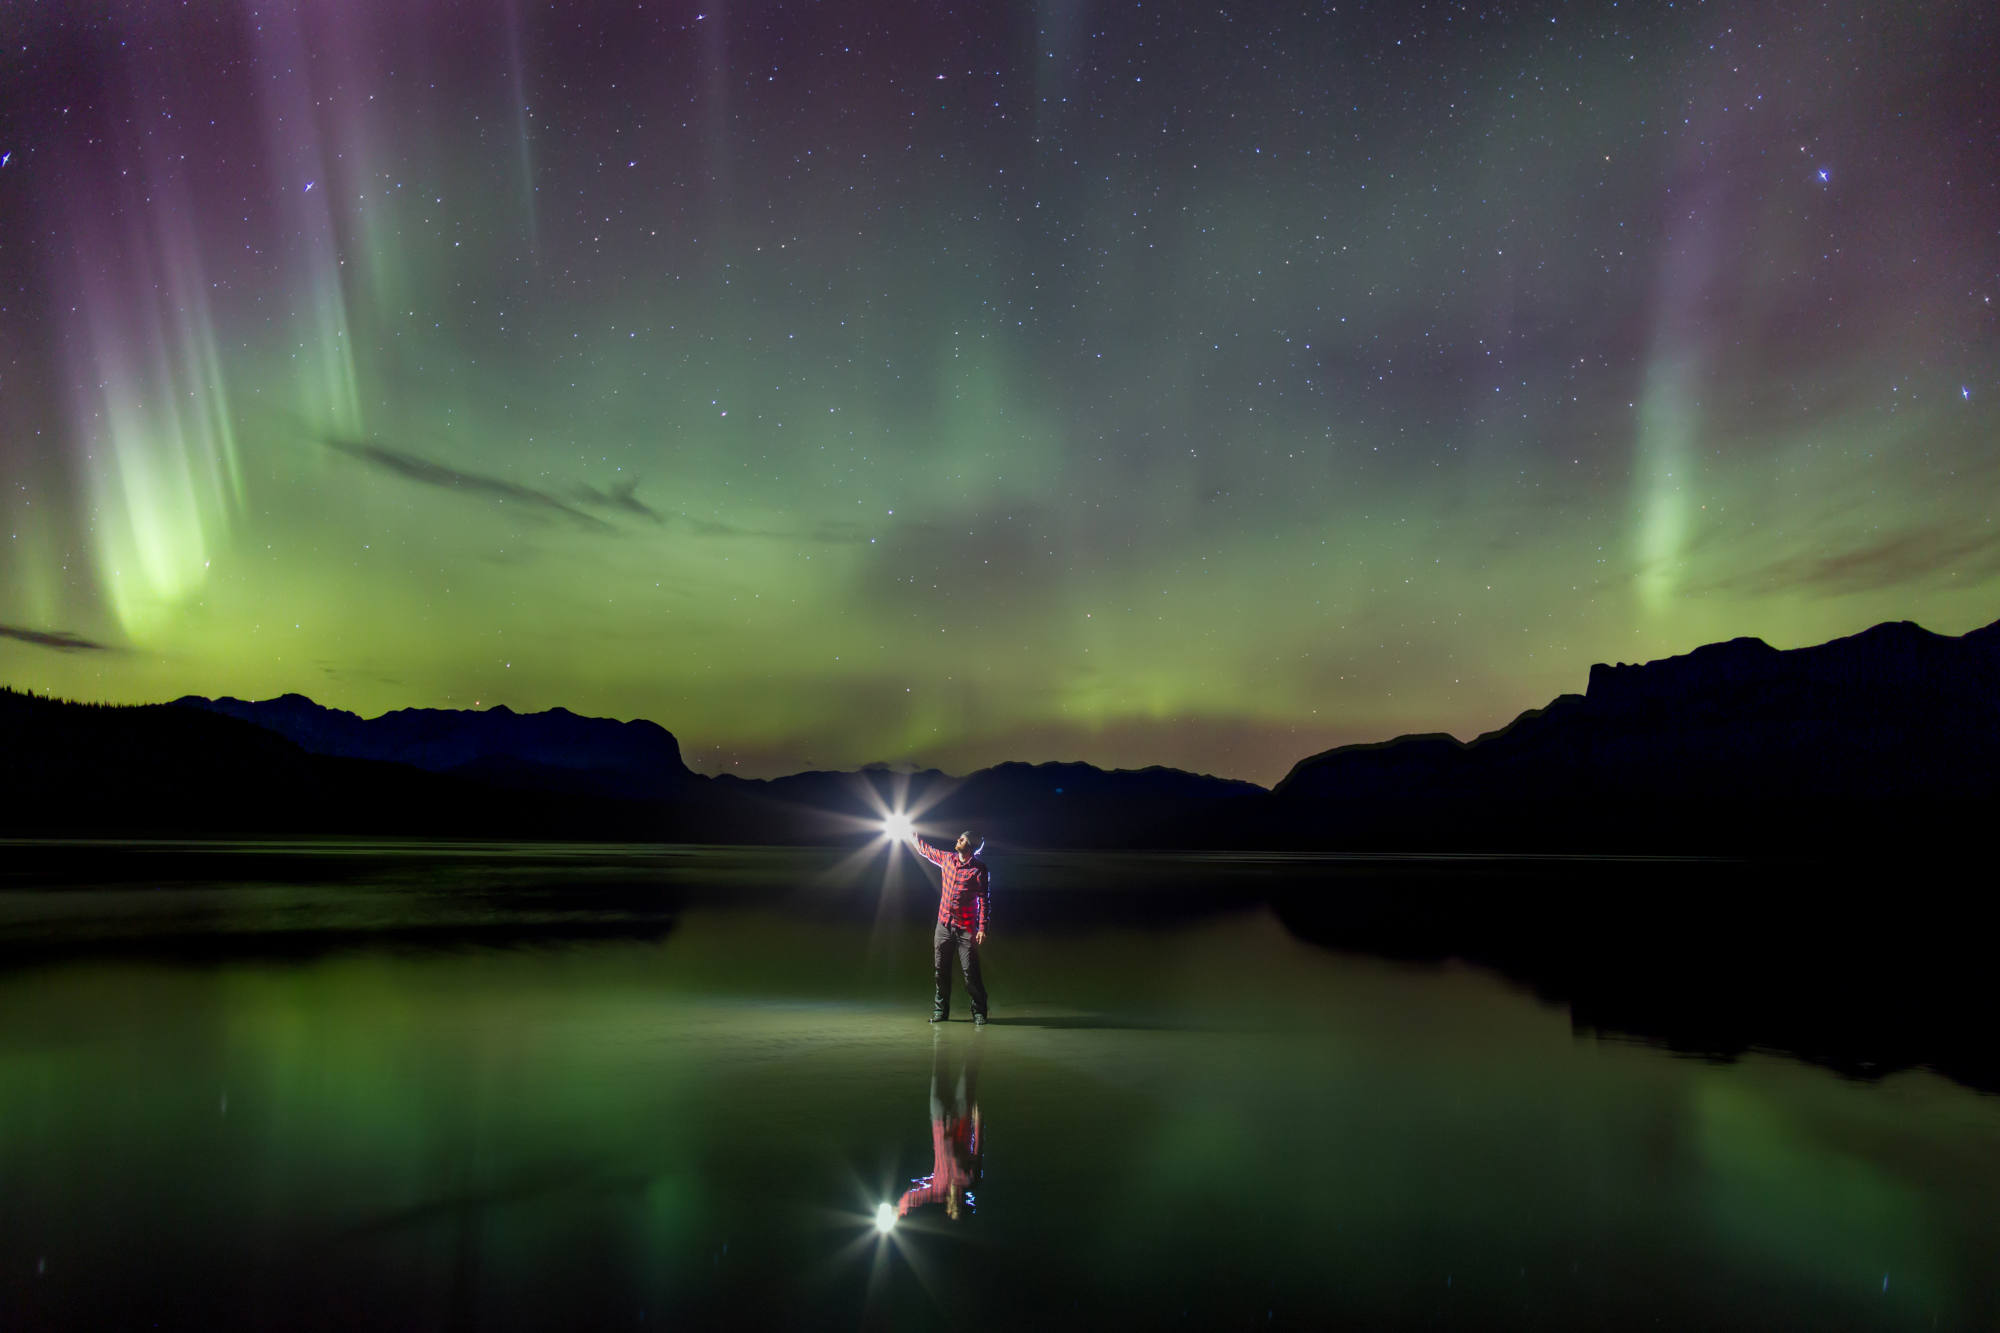 Northern Lights In Canada Discover in Banff National Park